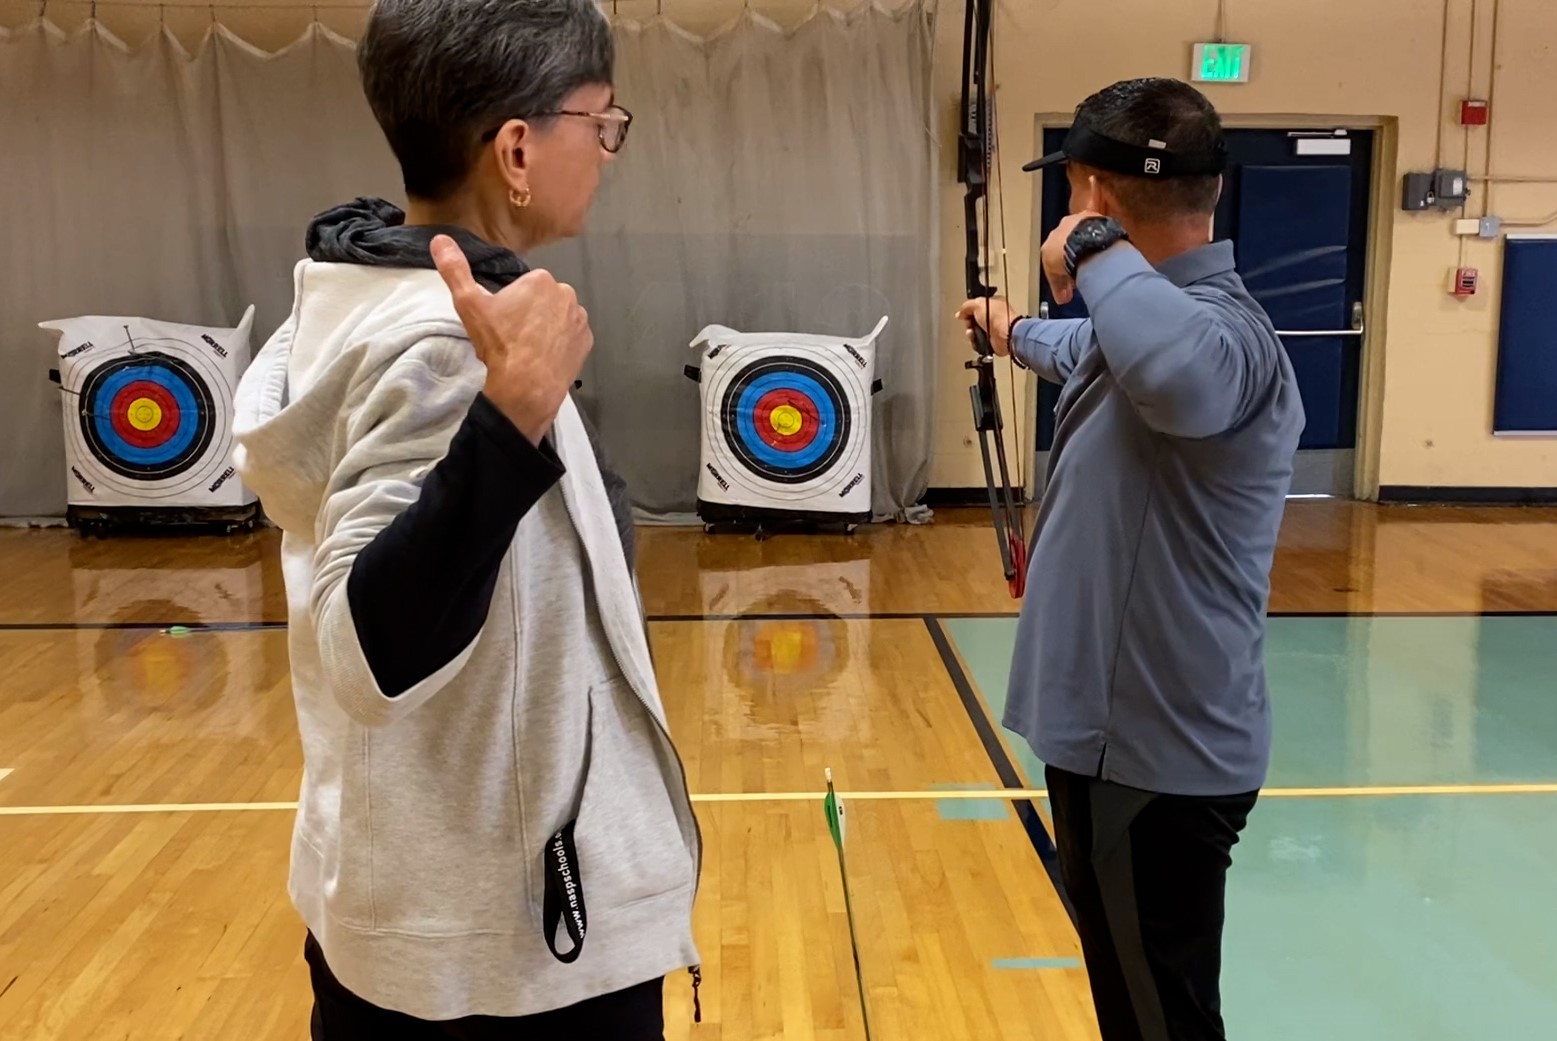 Two people stand in front of an archery target, one aiming a bow.